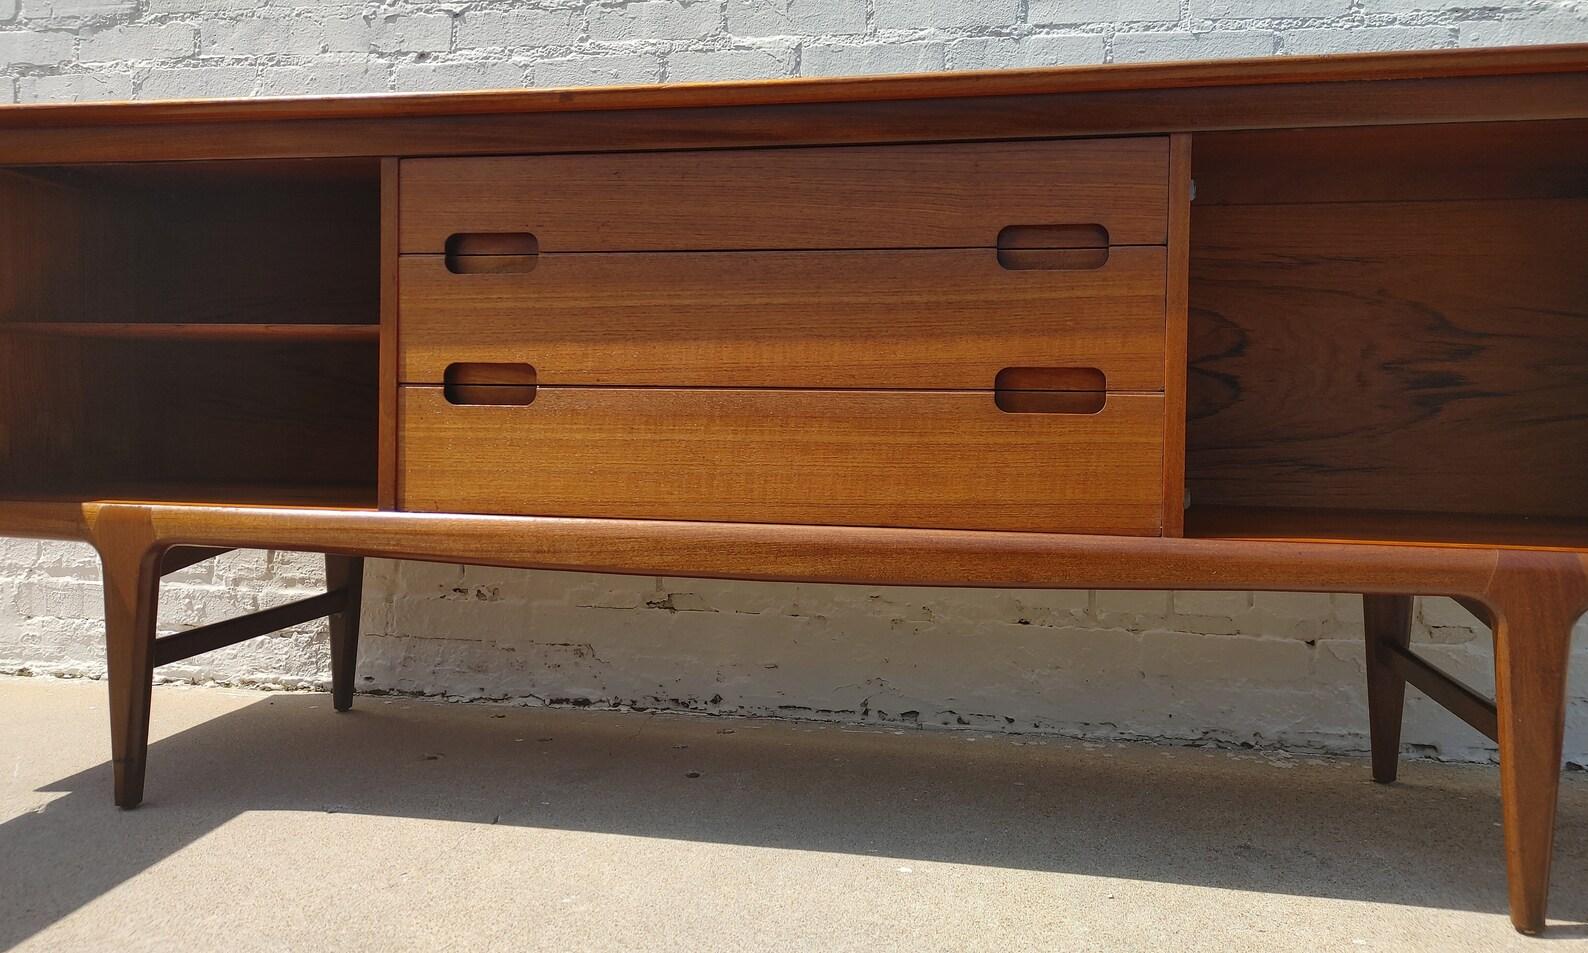 Mid Century English Modern Teak Sideboard by Younger
 
Above average vintage condition and structurally sound. Has some expected slight finish wear and scratching. Top has a couple discolorations and front edge has some slight dings. Outdoor listing